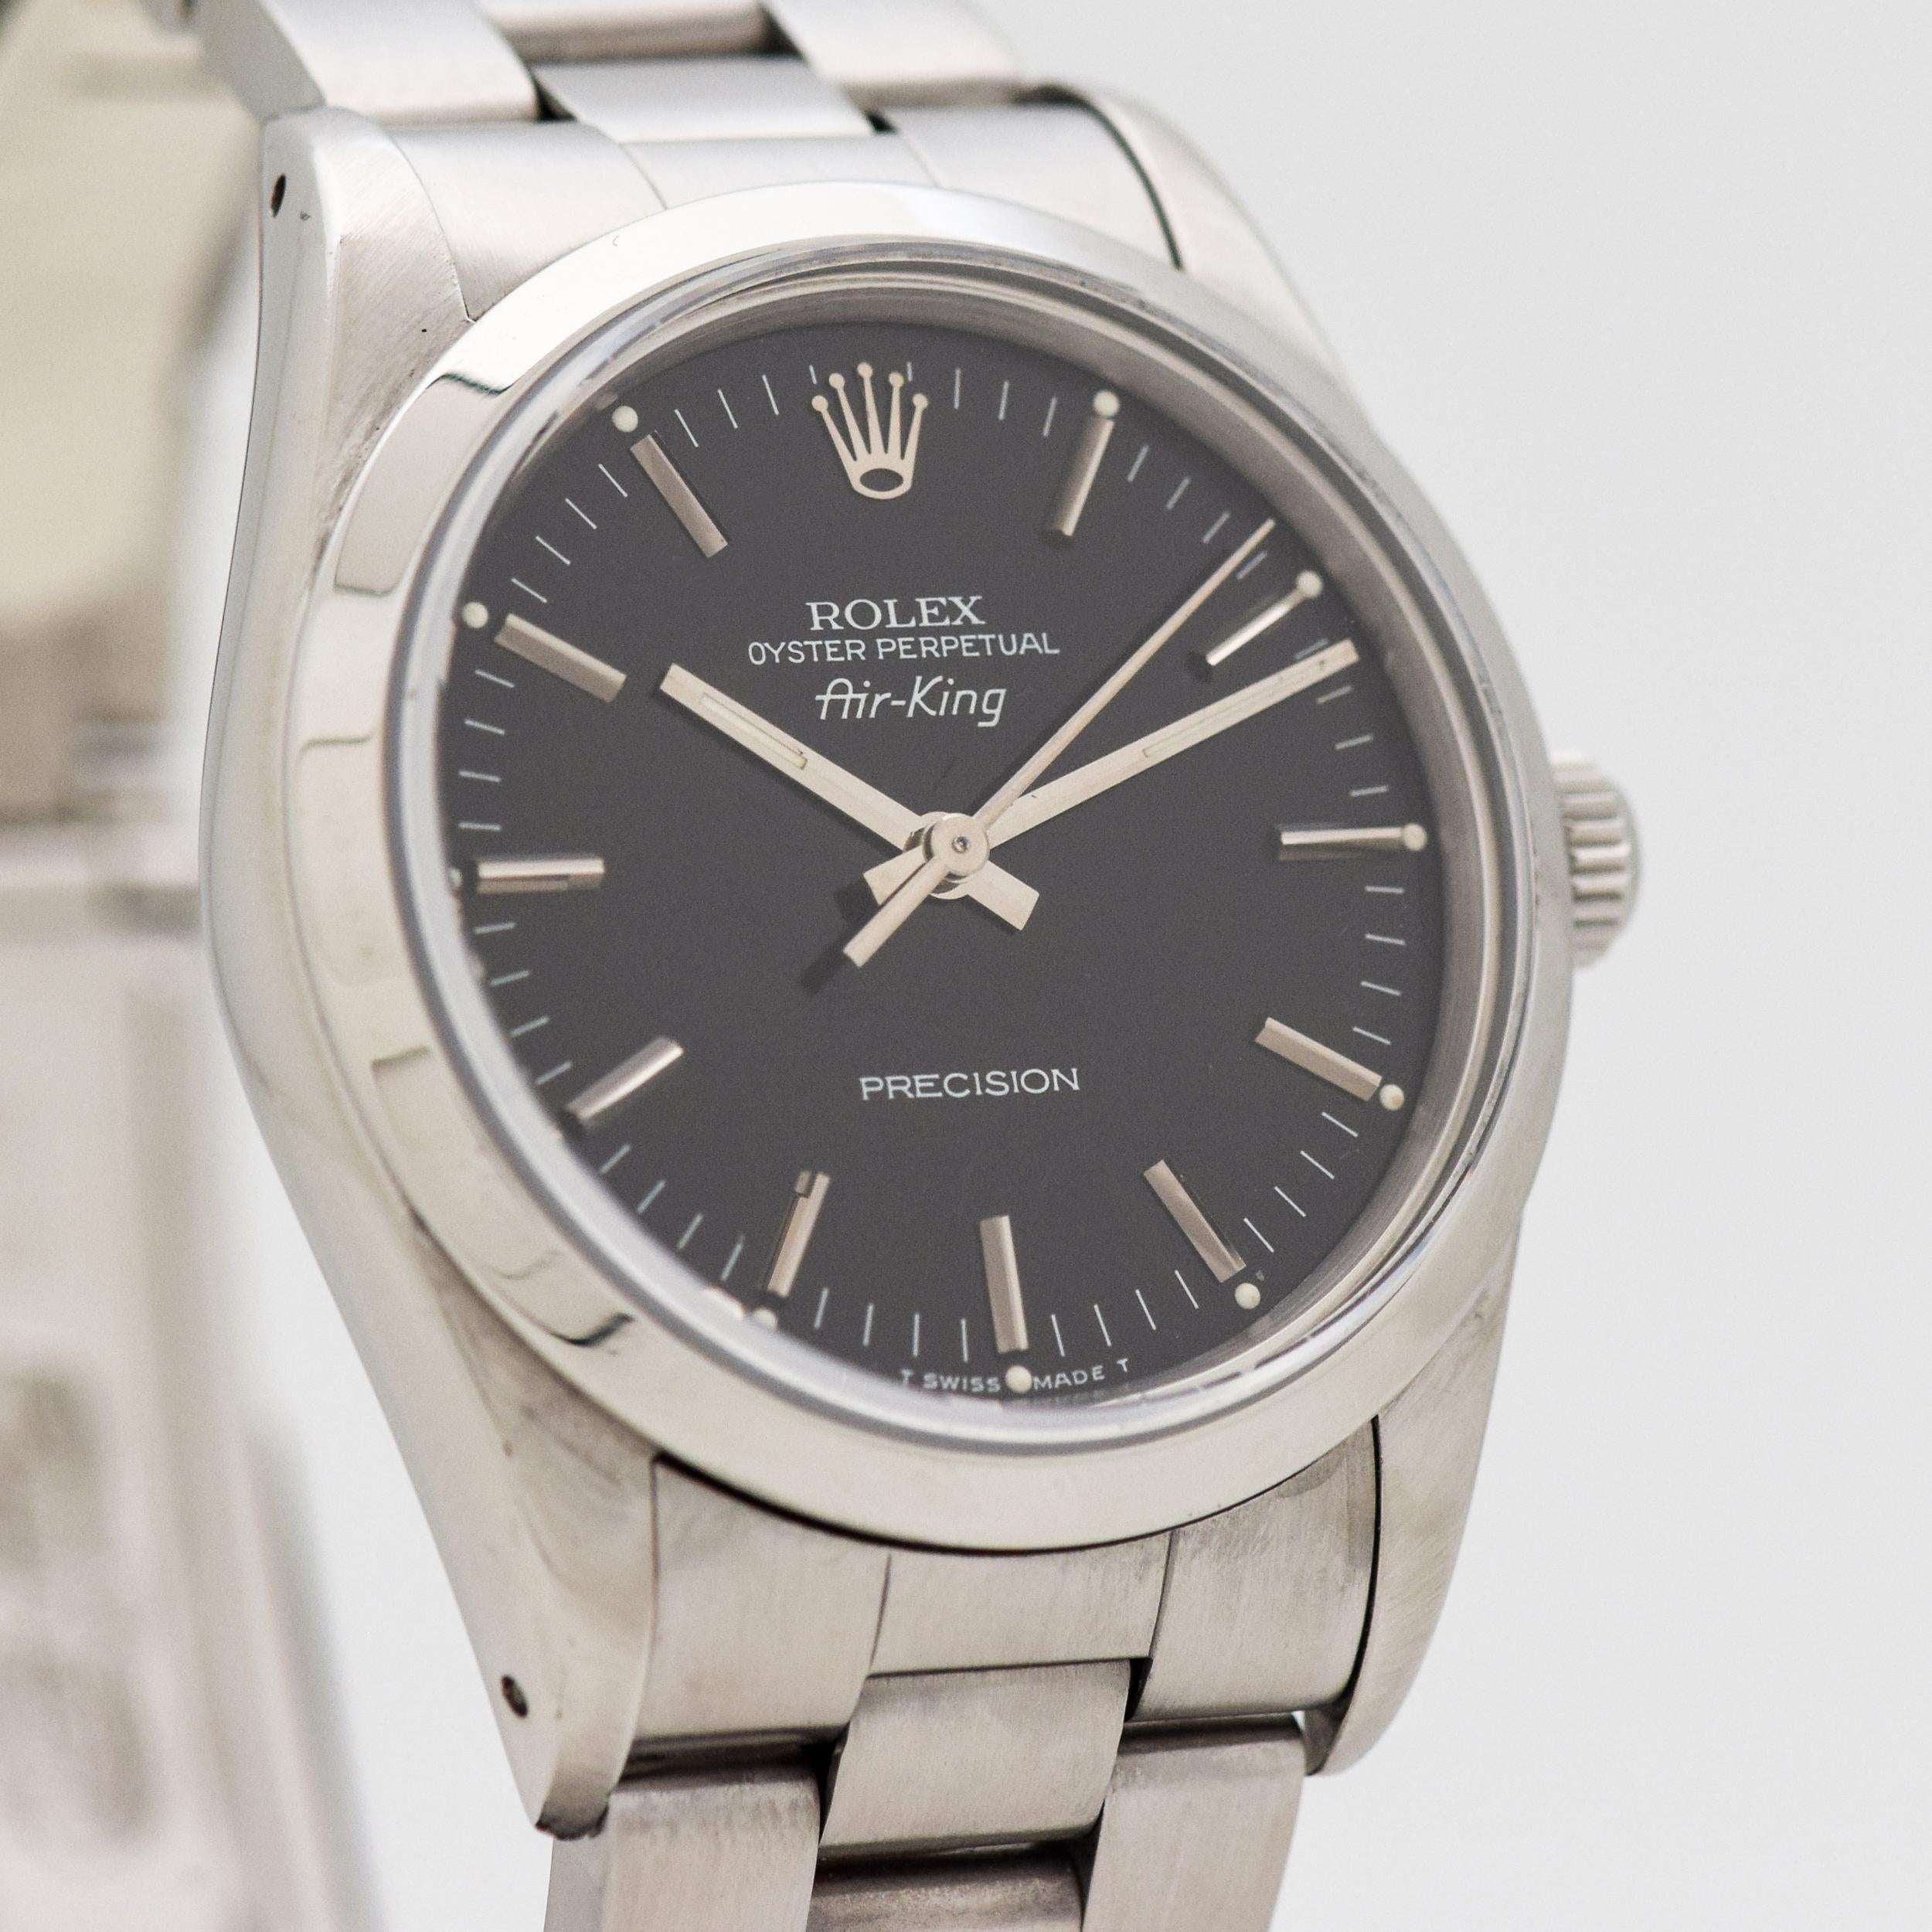 1989 Rolex Air-King Ref. 14000 Stainless Steel watch with Original RARE Charcoal Black Dial with Applied Steel Stick/Bar/Baton Markers with Original Rolex Stainless Steel Oyster Bracelet. 34mm x 43mm lug to lug (1.34 in. x 1.69 in.) - Powered by a